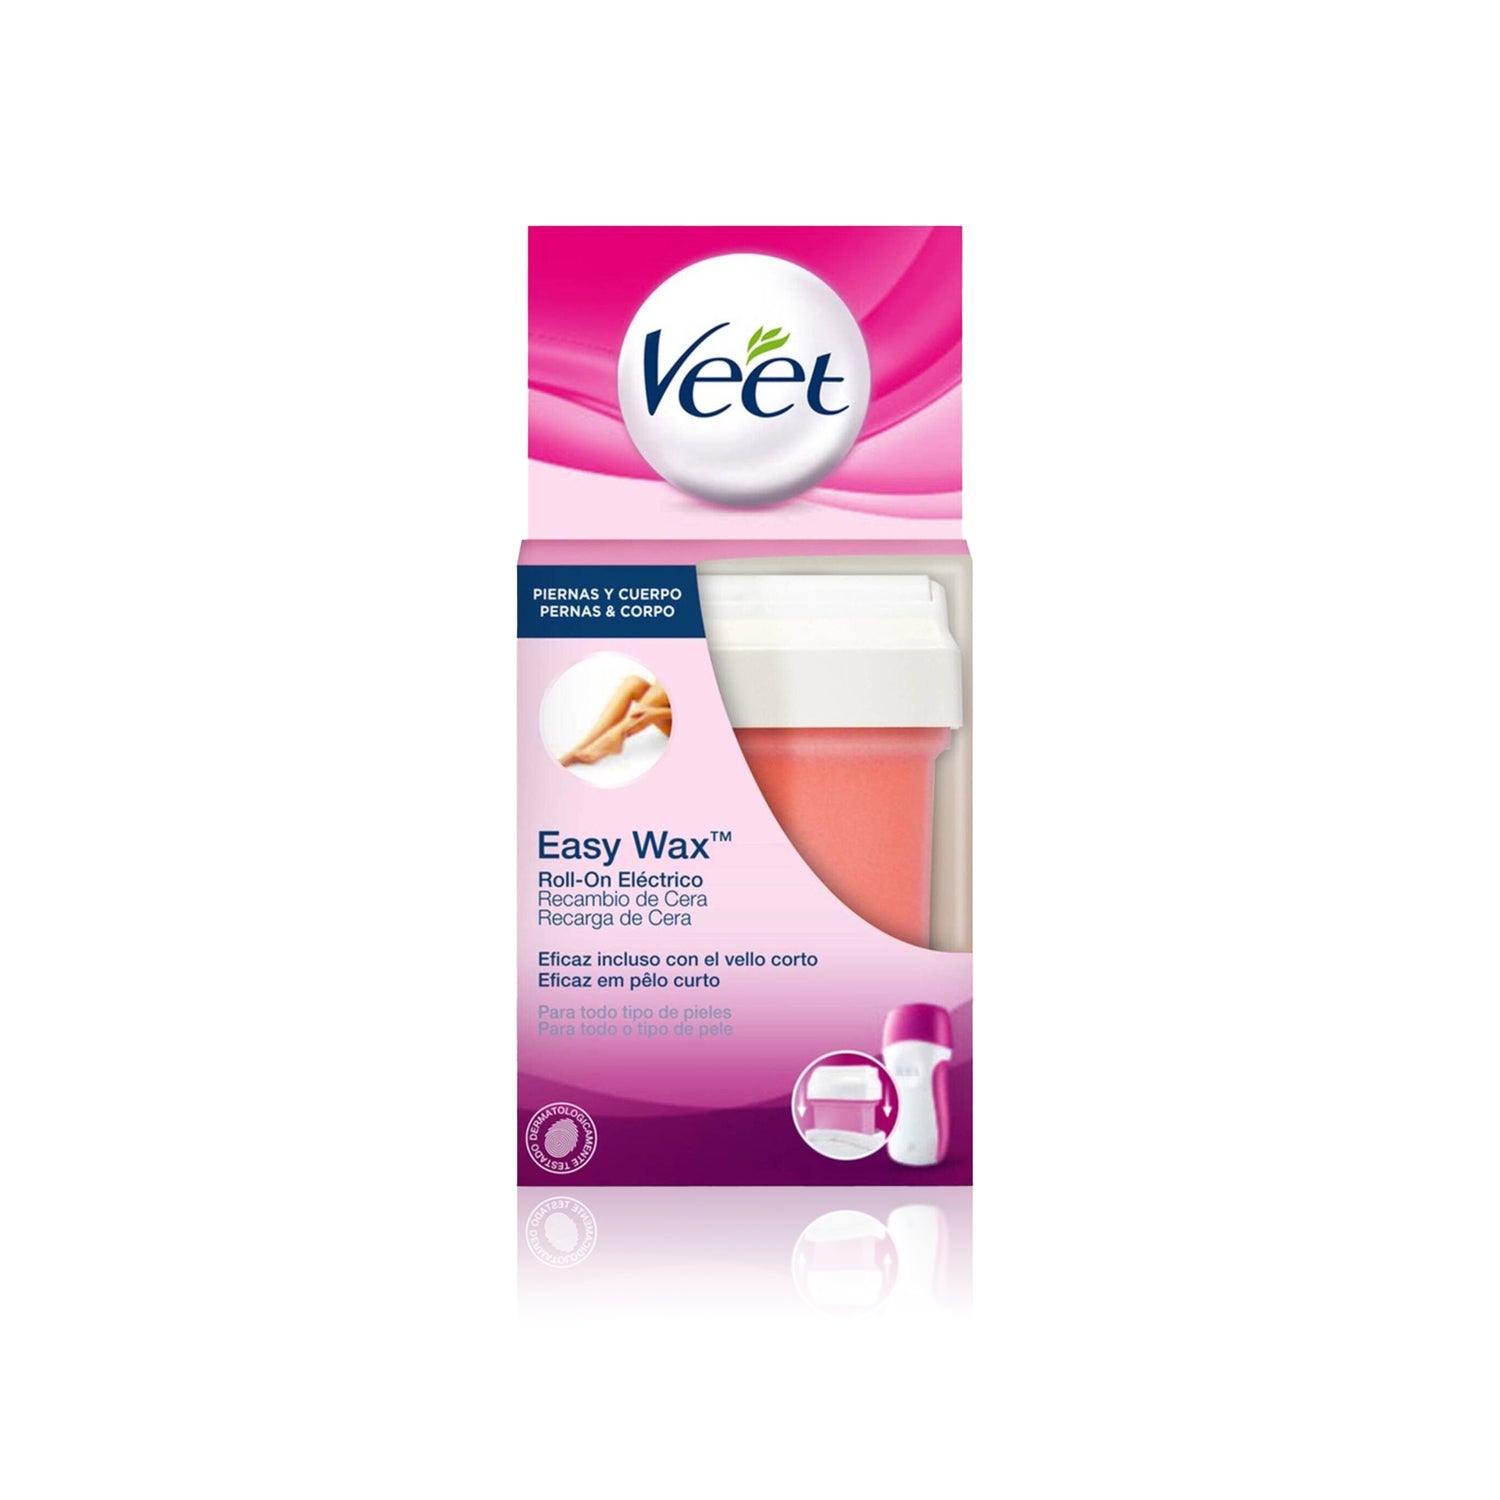 Veet Recharge Hot Wax Roll-On Electric